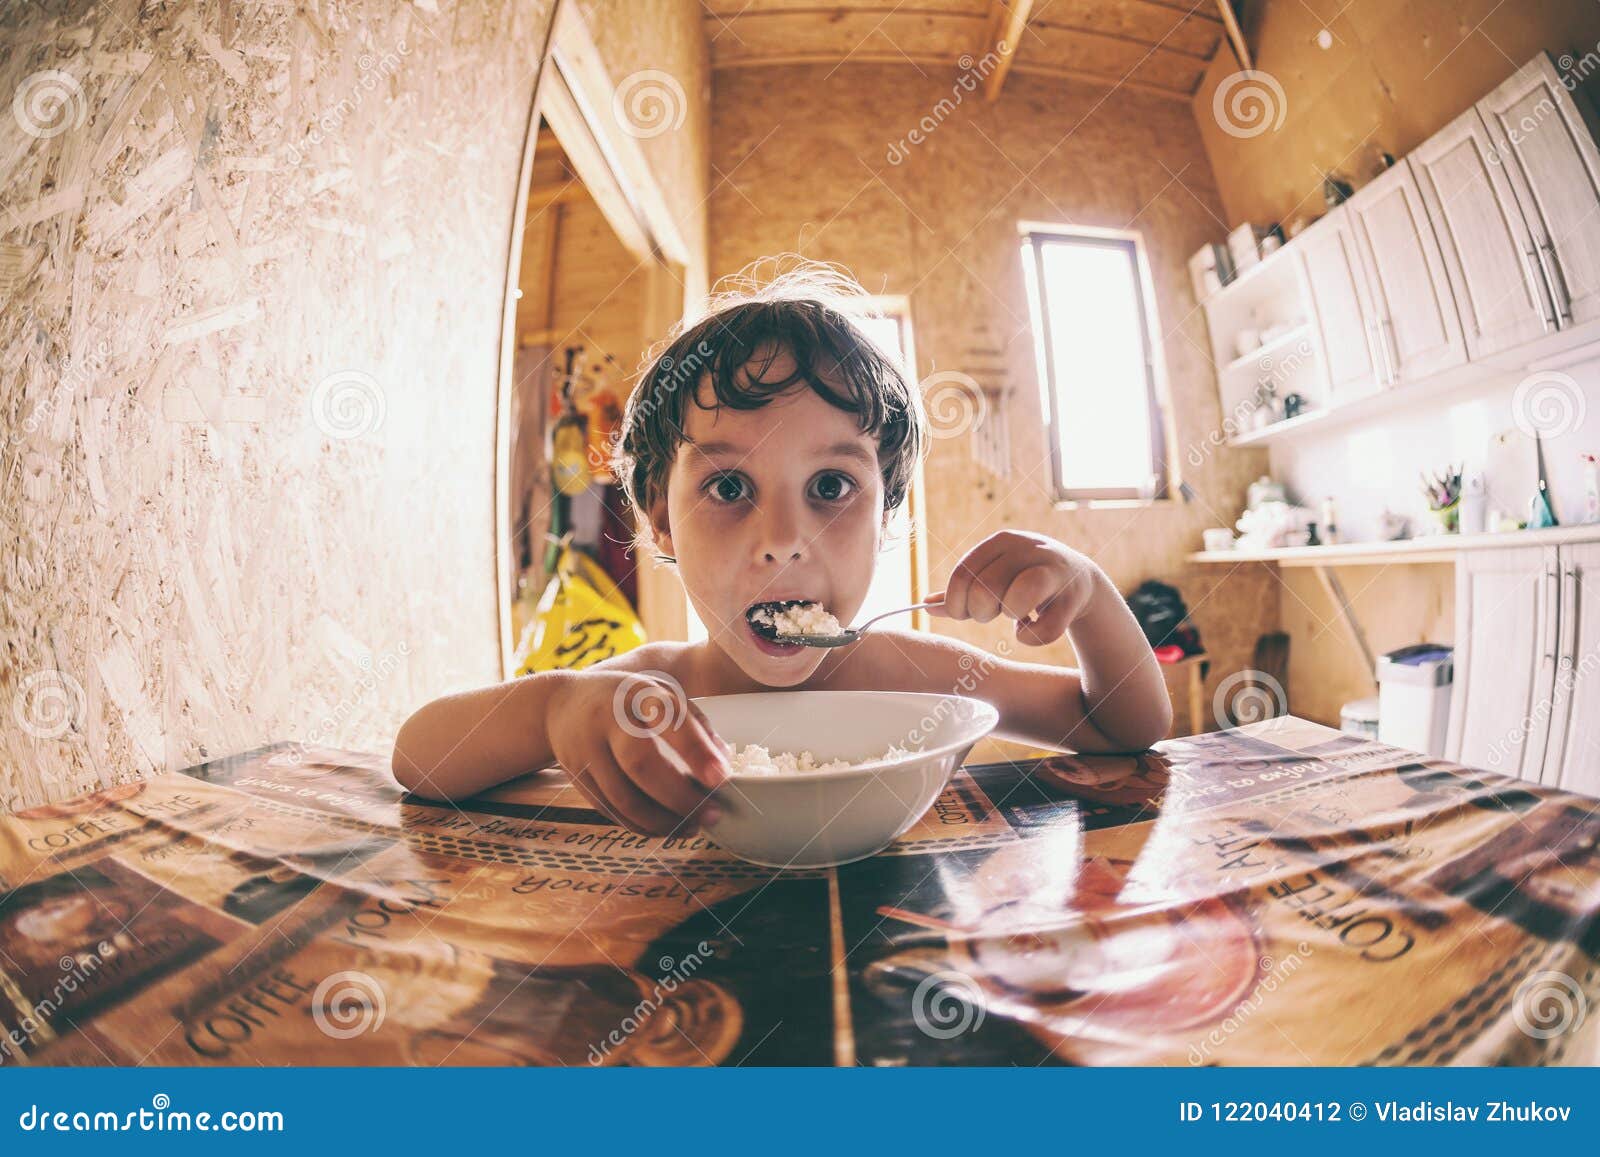 The Child Is Eating Cottage Cheese Stock Photo Image Of Dessert